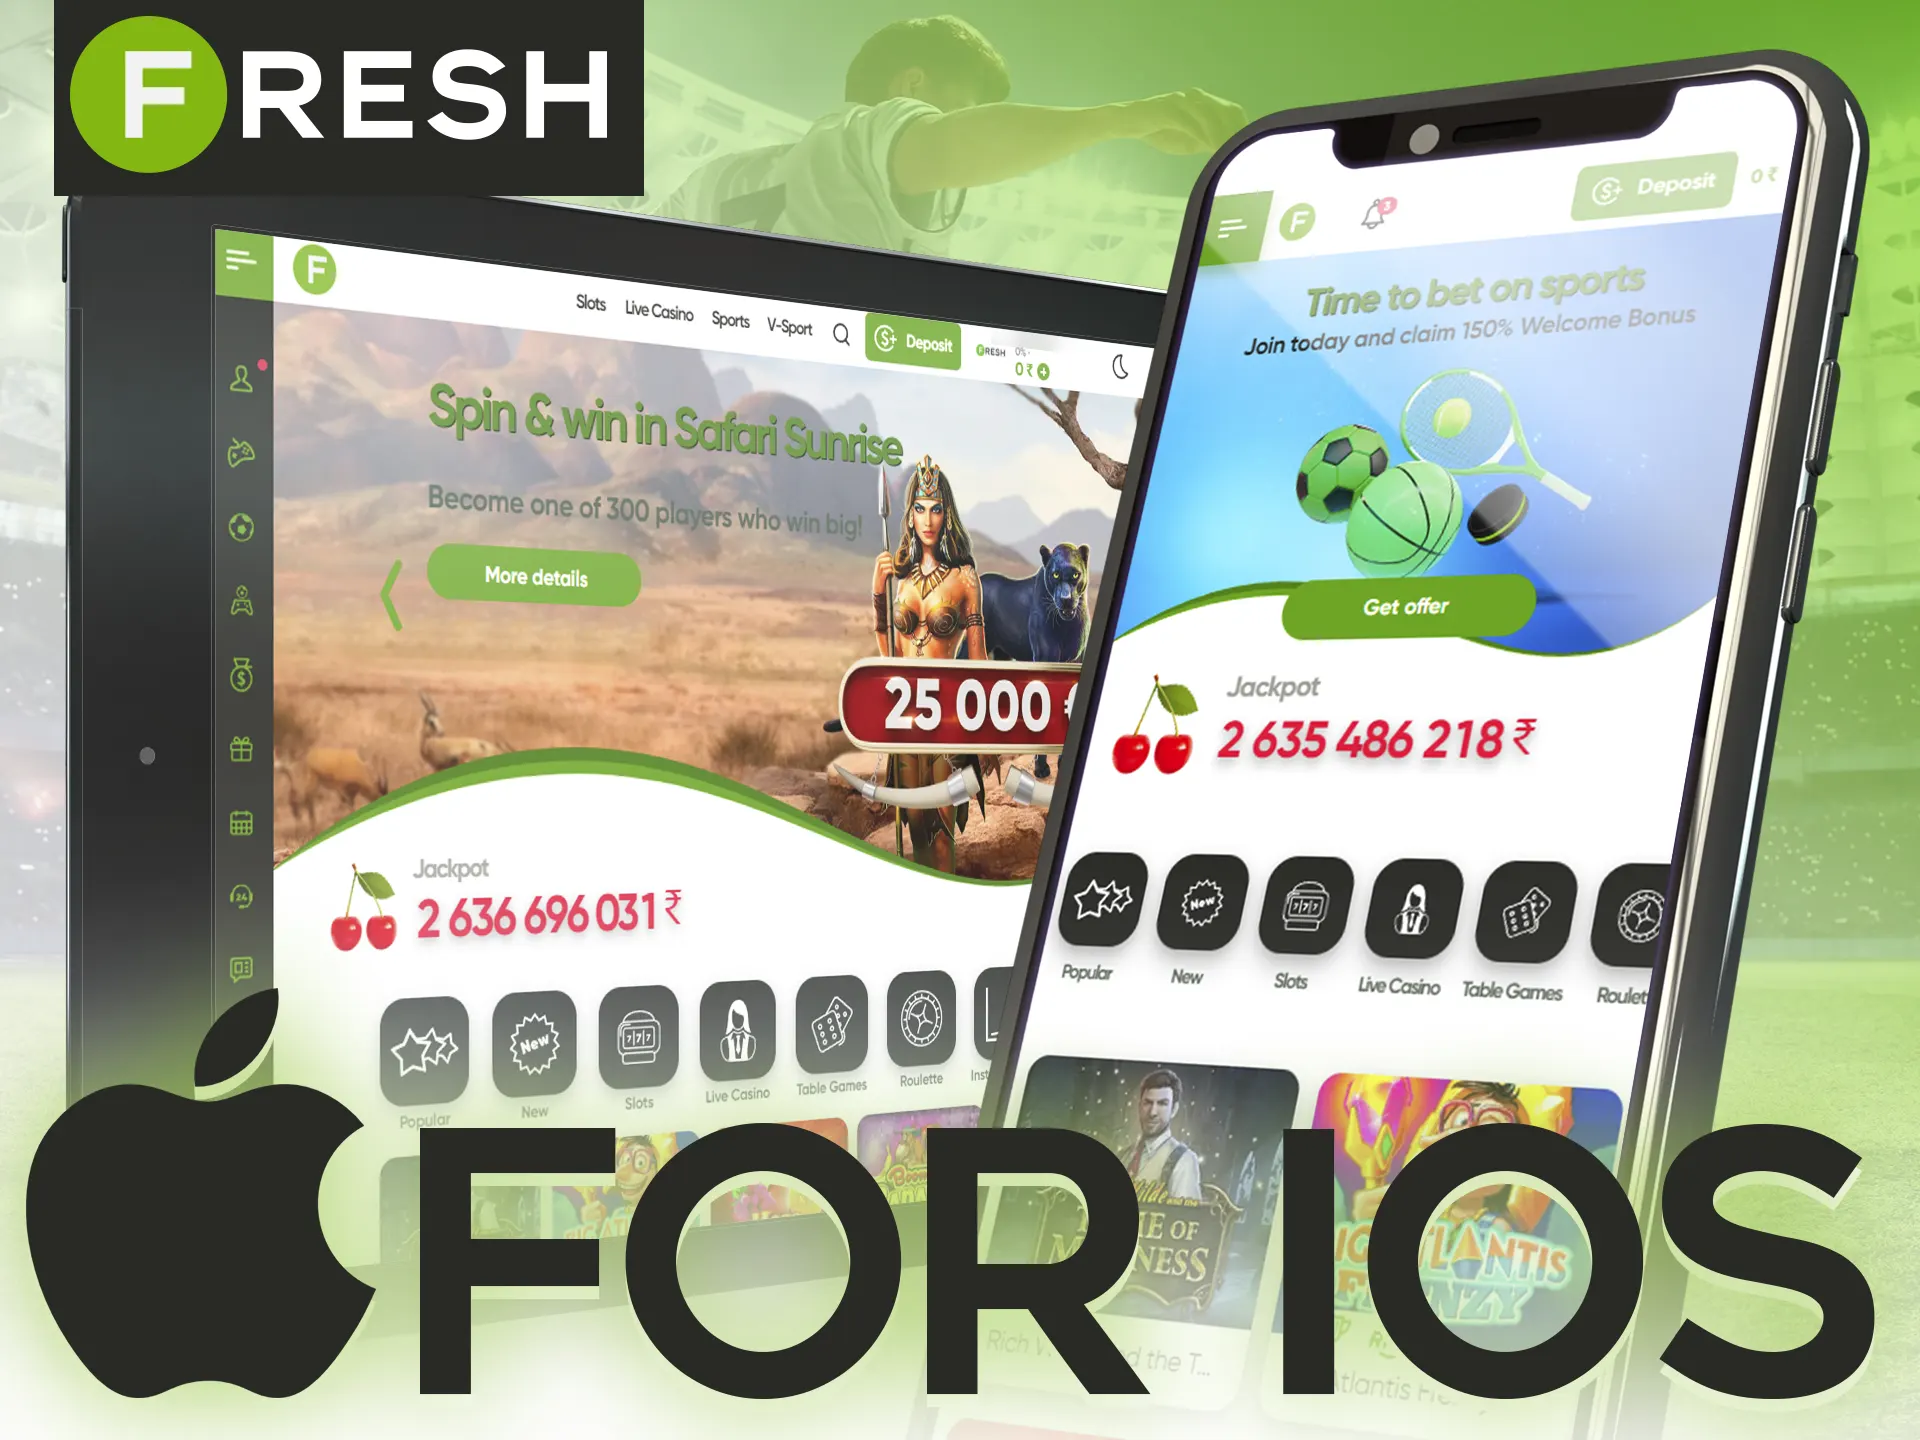 Install the Fresh Casino app on your iPhone.